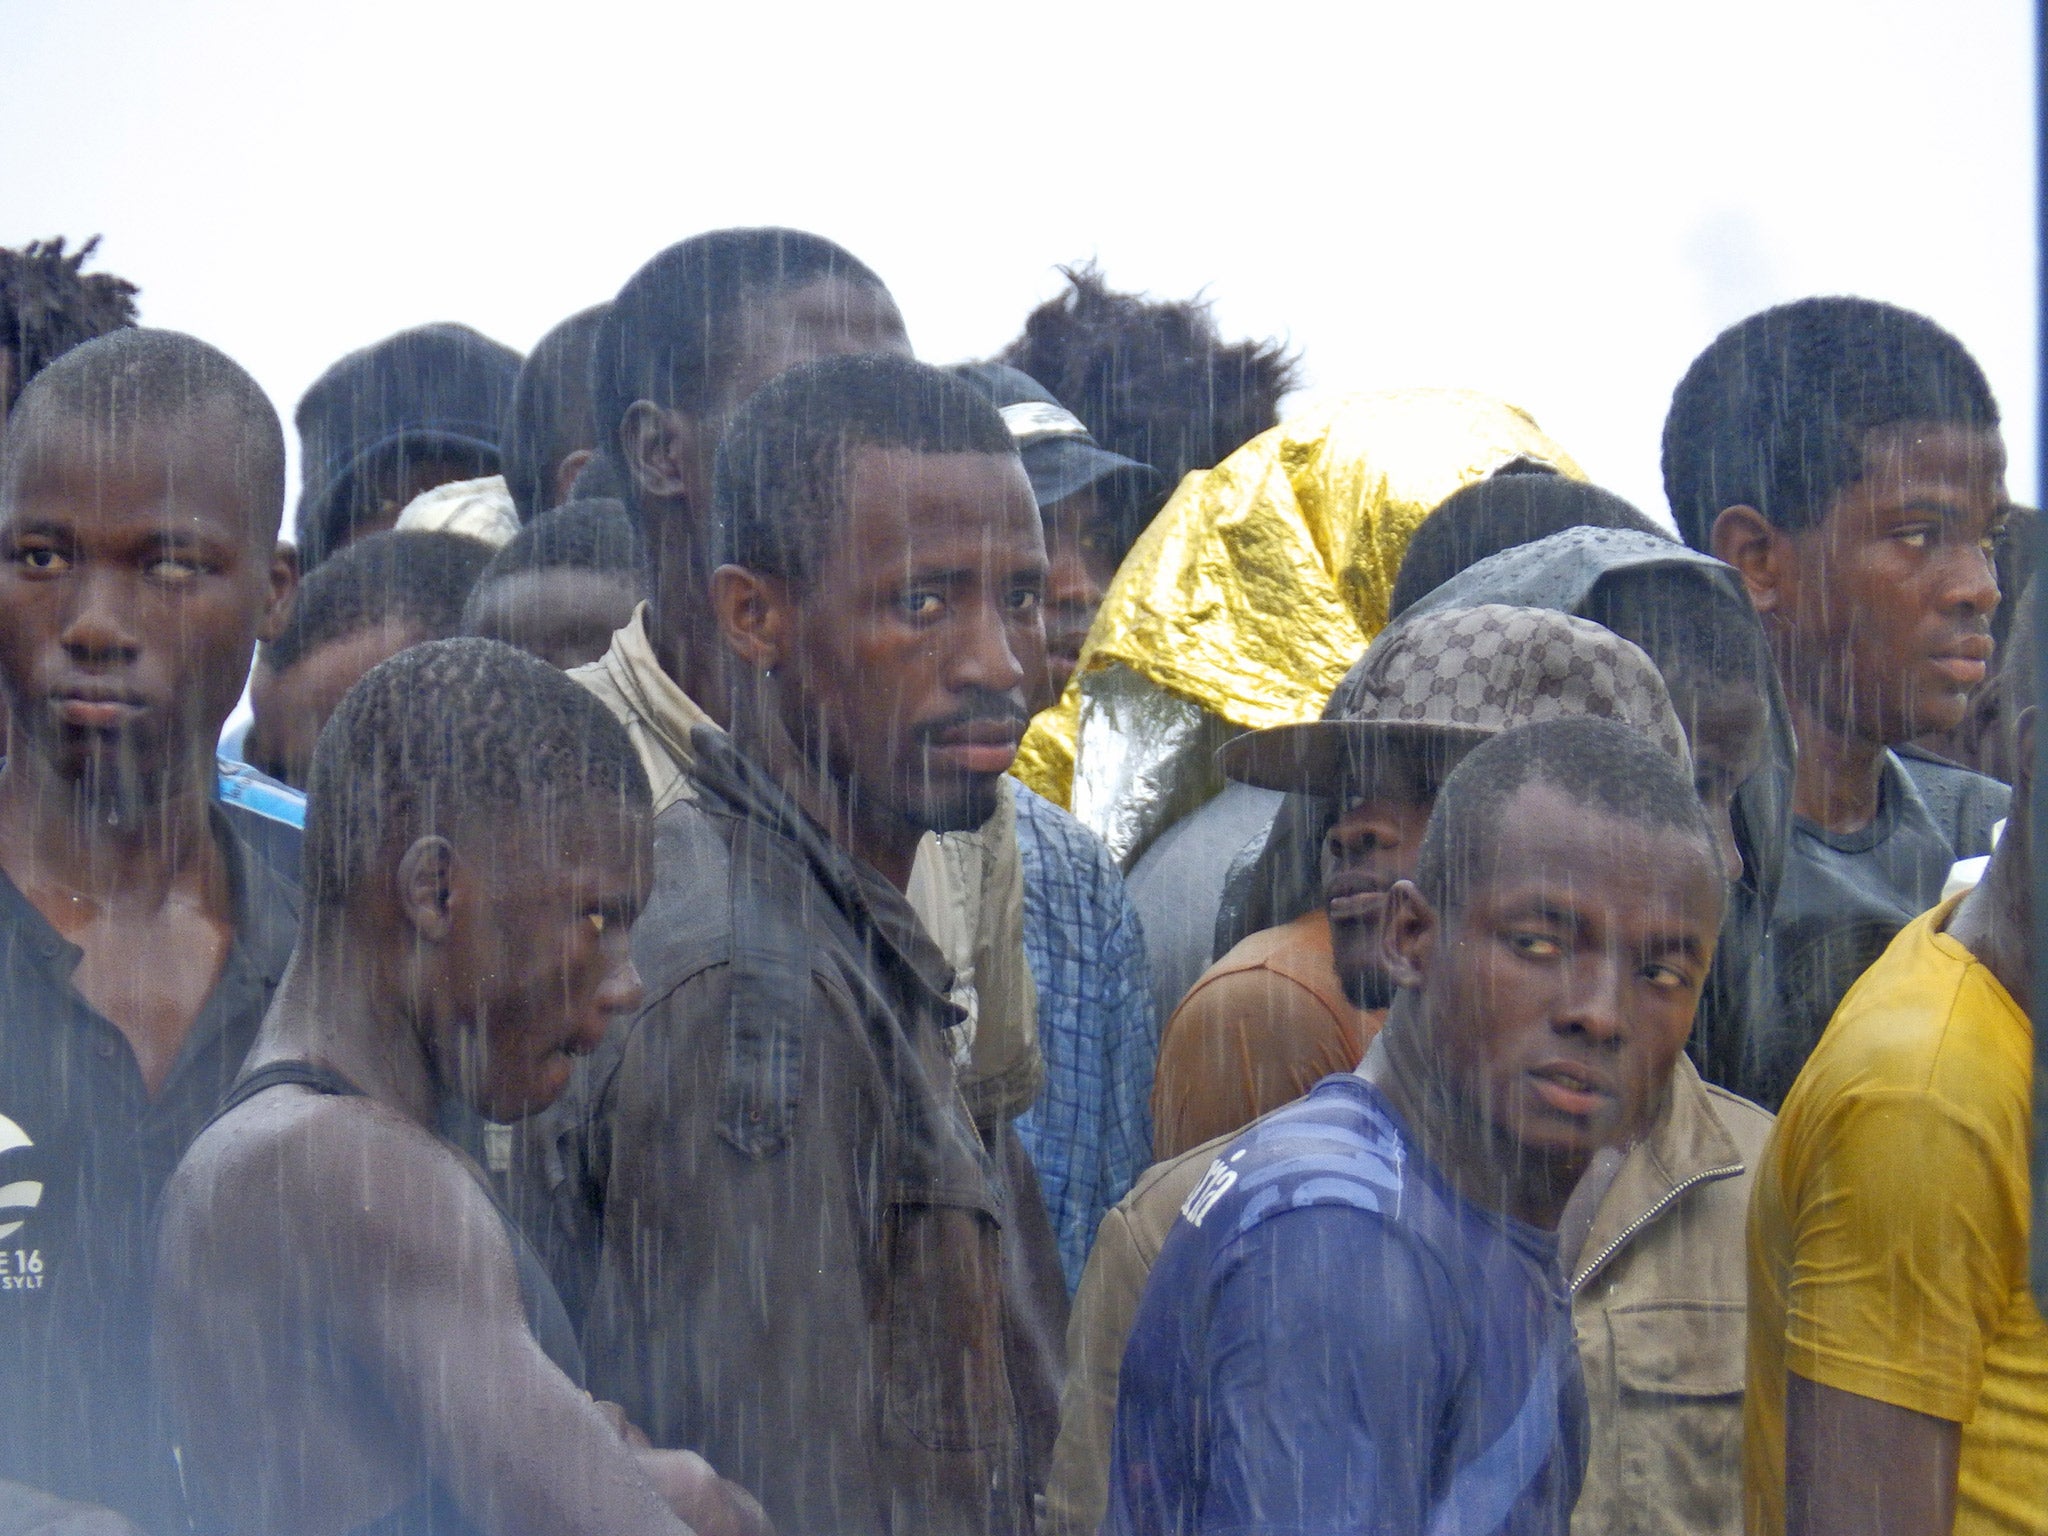 Migrants wait in the rain after disembarking from the coastguard ship in Sicily in August 2015